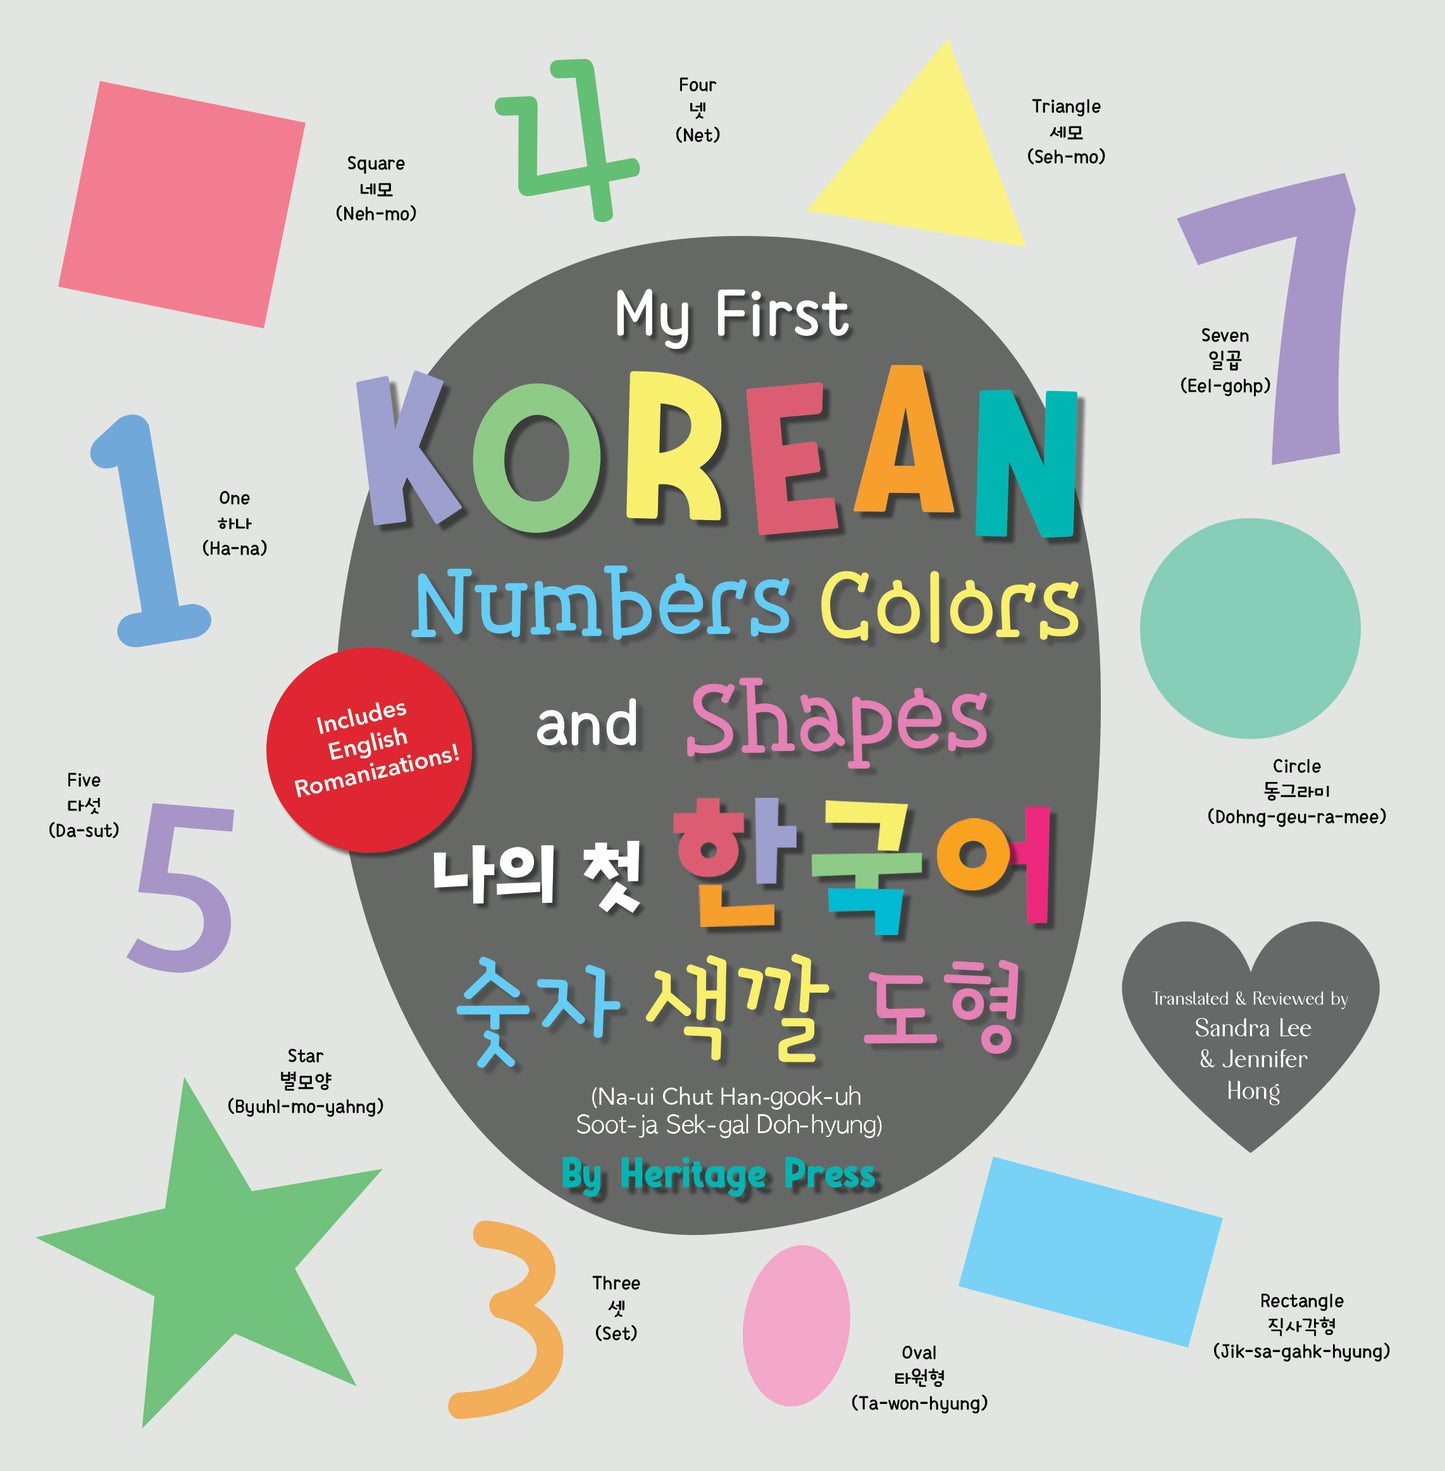 My First Korean Numbers, Colors, and Shapes / 나의 첫 한국어 숫자, 색깔, 도형